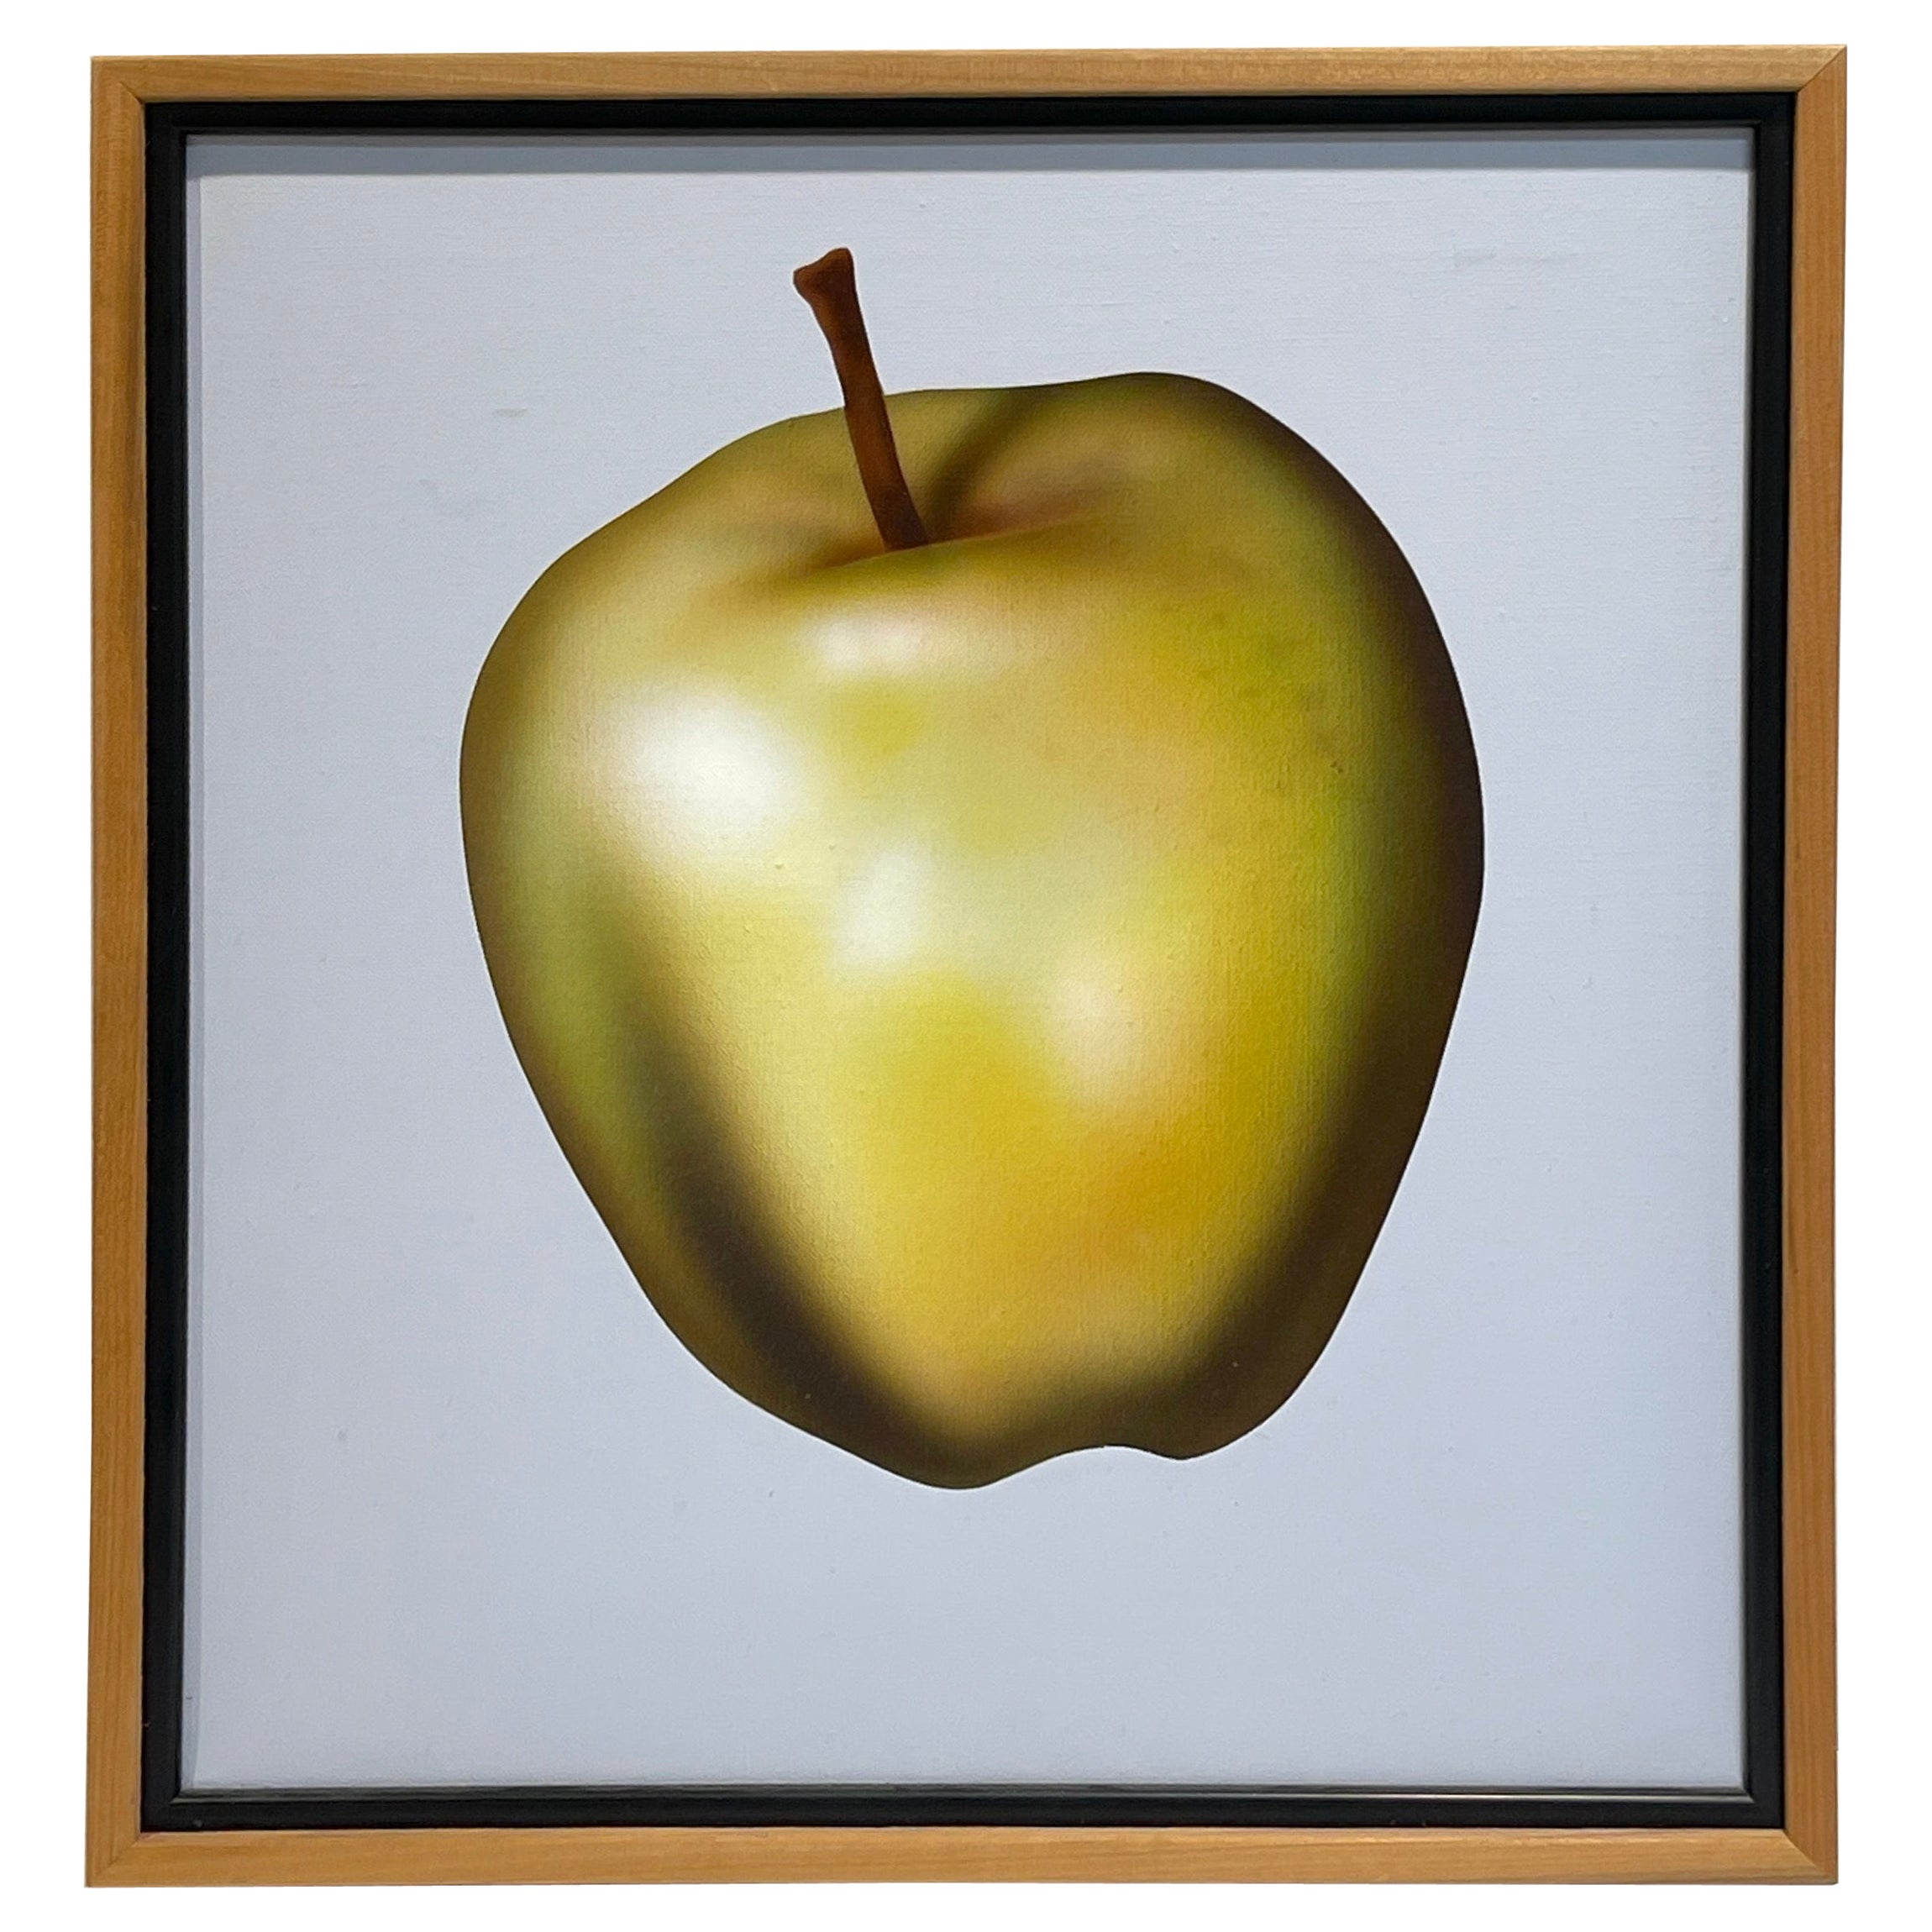 Clarence Measelle, (American, b. 1947) Green Apple, 1983 For Sale